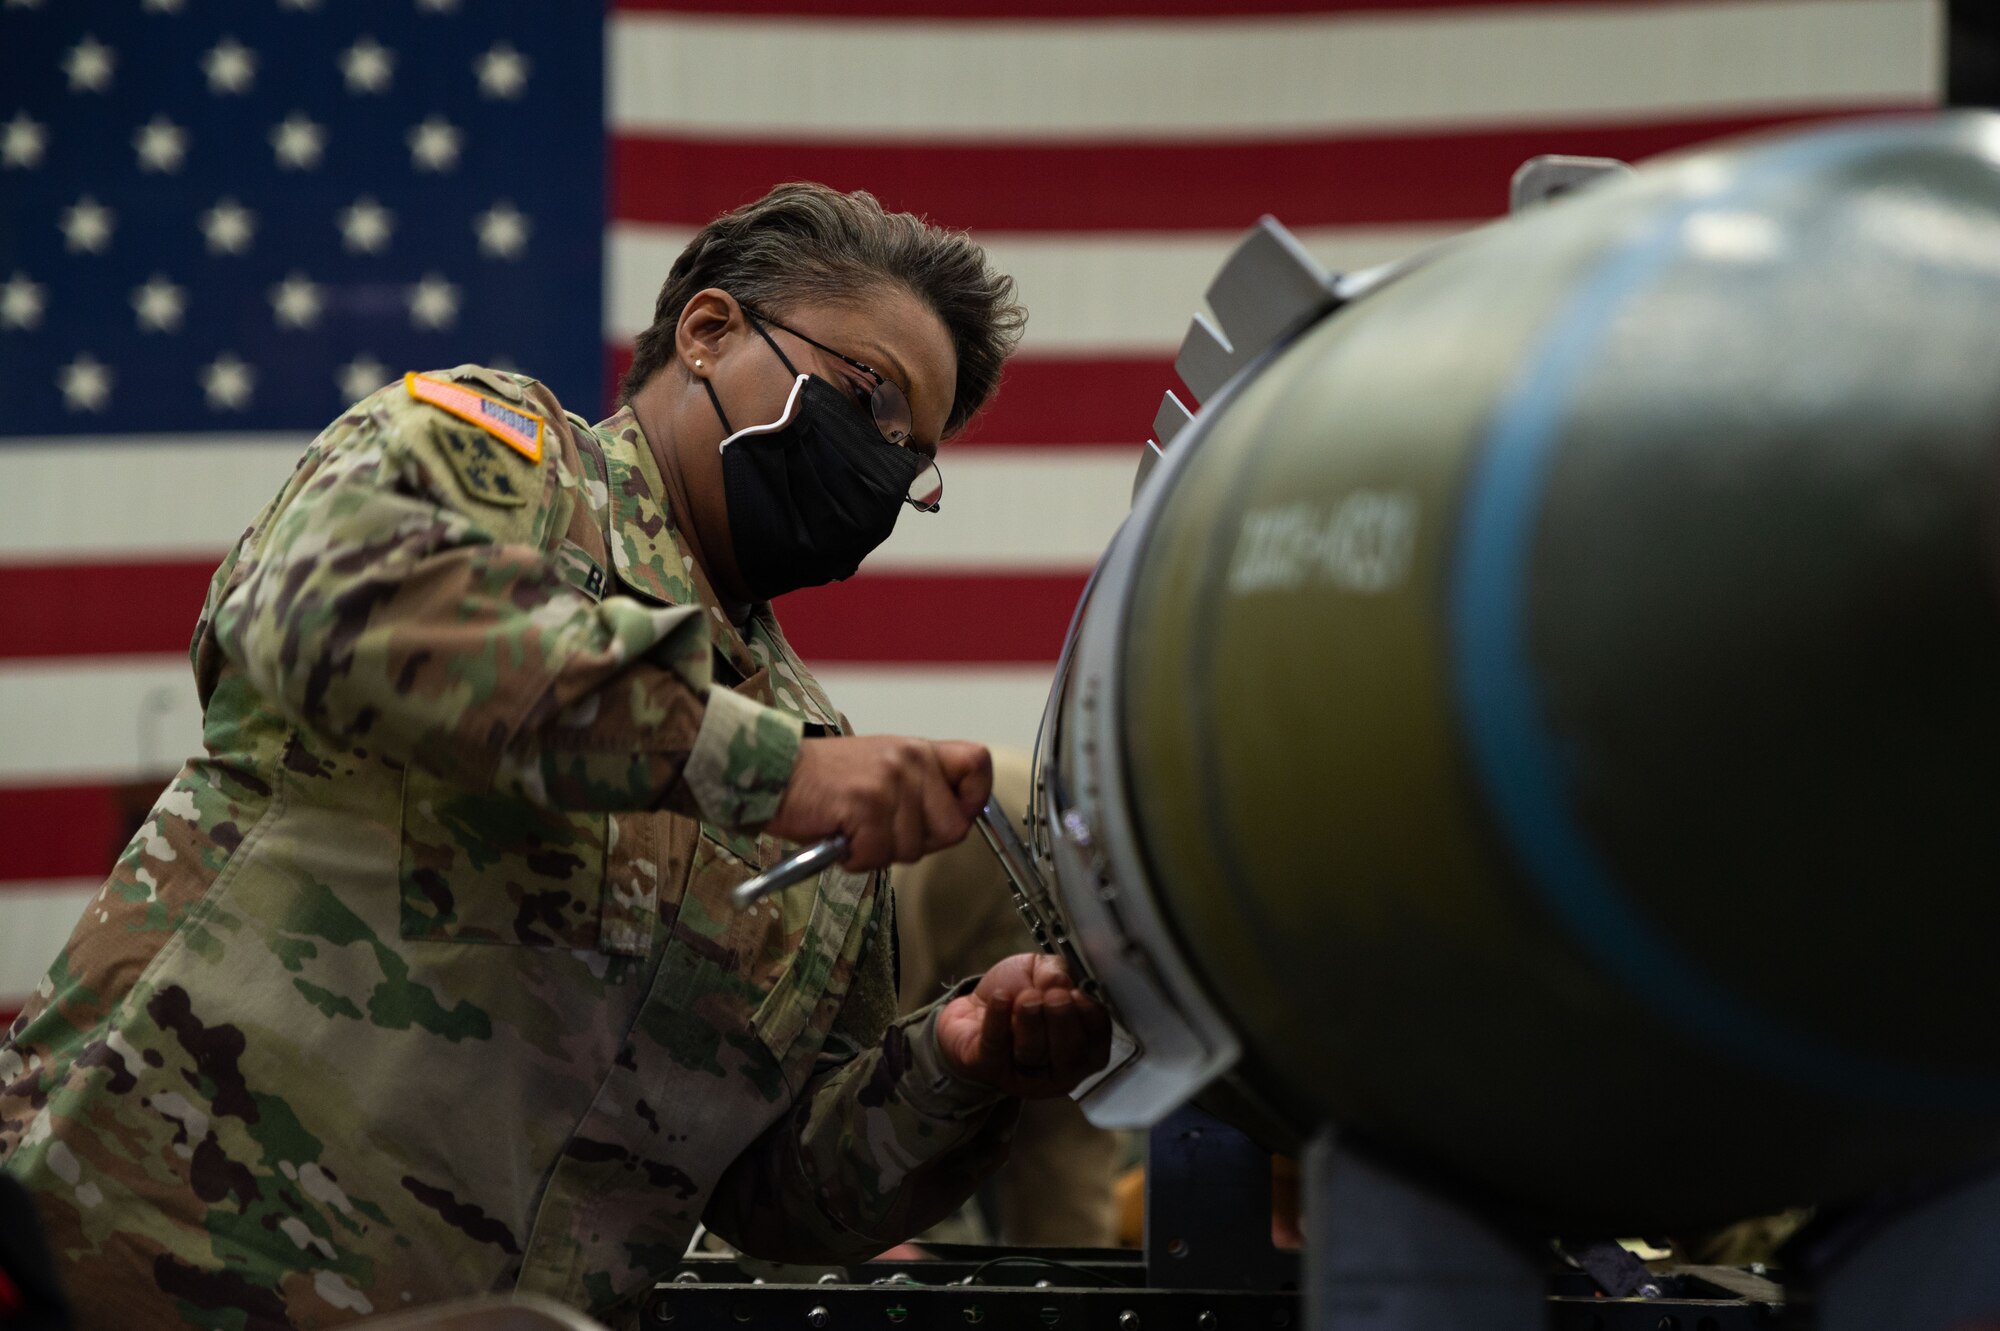 Brig. Gen. Felicia Brokaw, United States Forces Korea J-4 (Wartime) assistant chief of staff, assembles a guided bomb unit during Airpower Immersion Day at Osan Air Base, Republic of Korea, February 11, 2022. The event enabled leadership to see how multiple missions on base play a vital role in air component readiness. (U.S. Air Force photo by Senior Airman Megan Estrada)